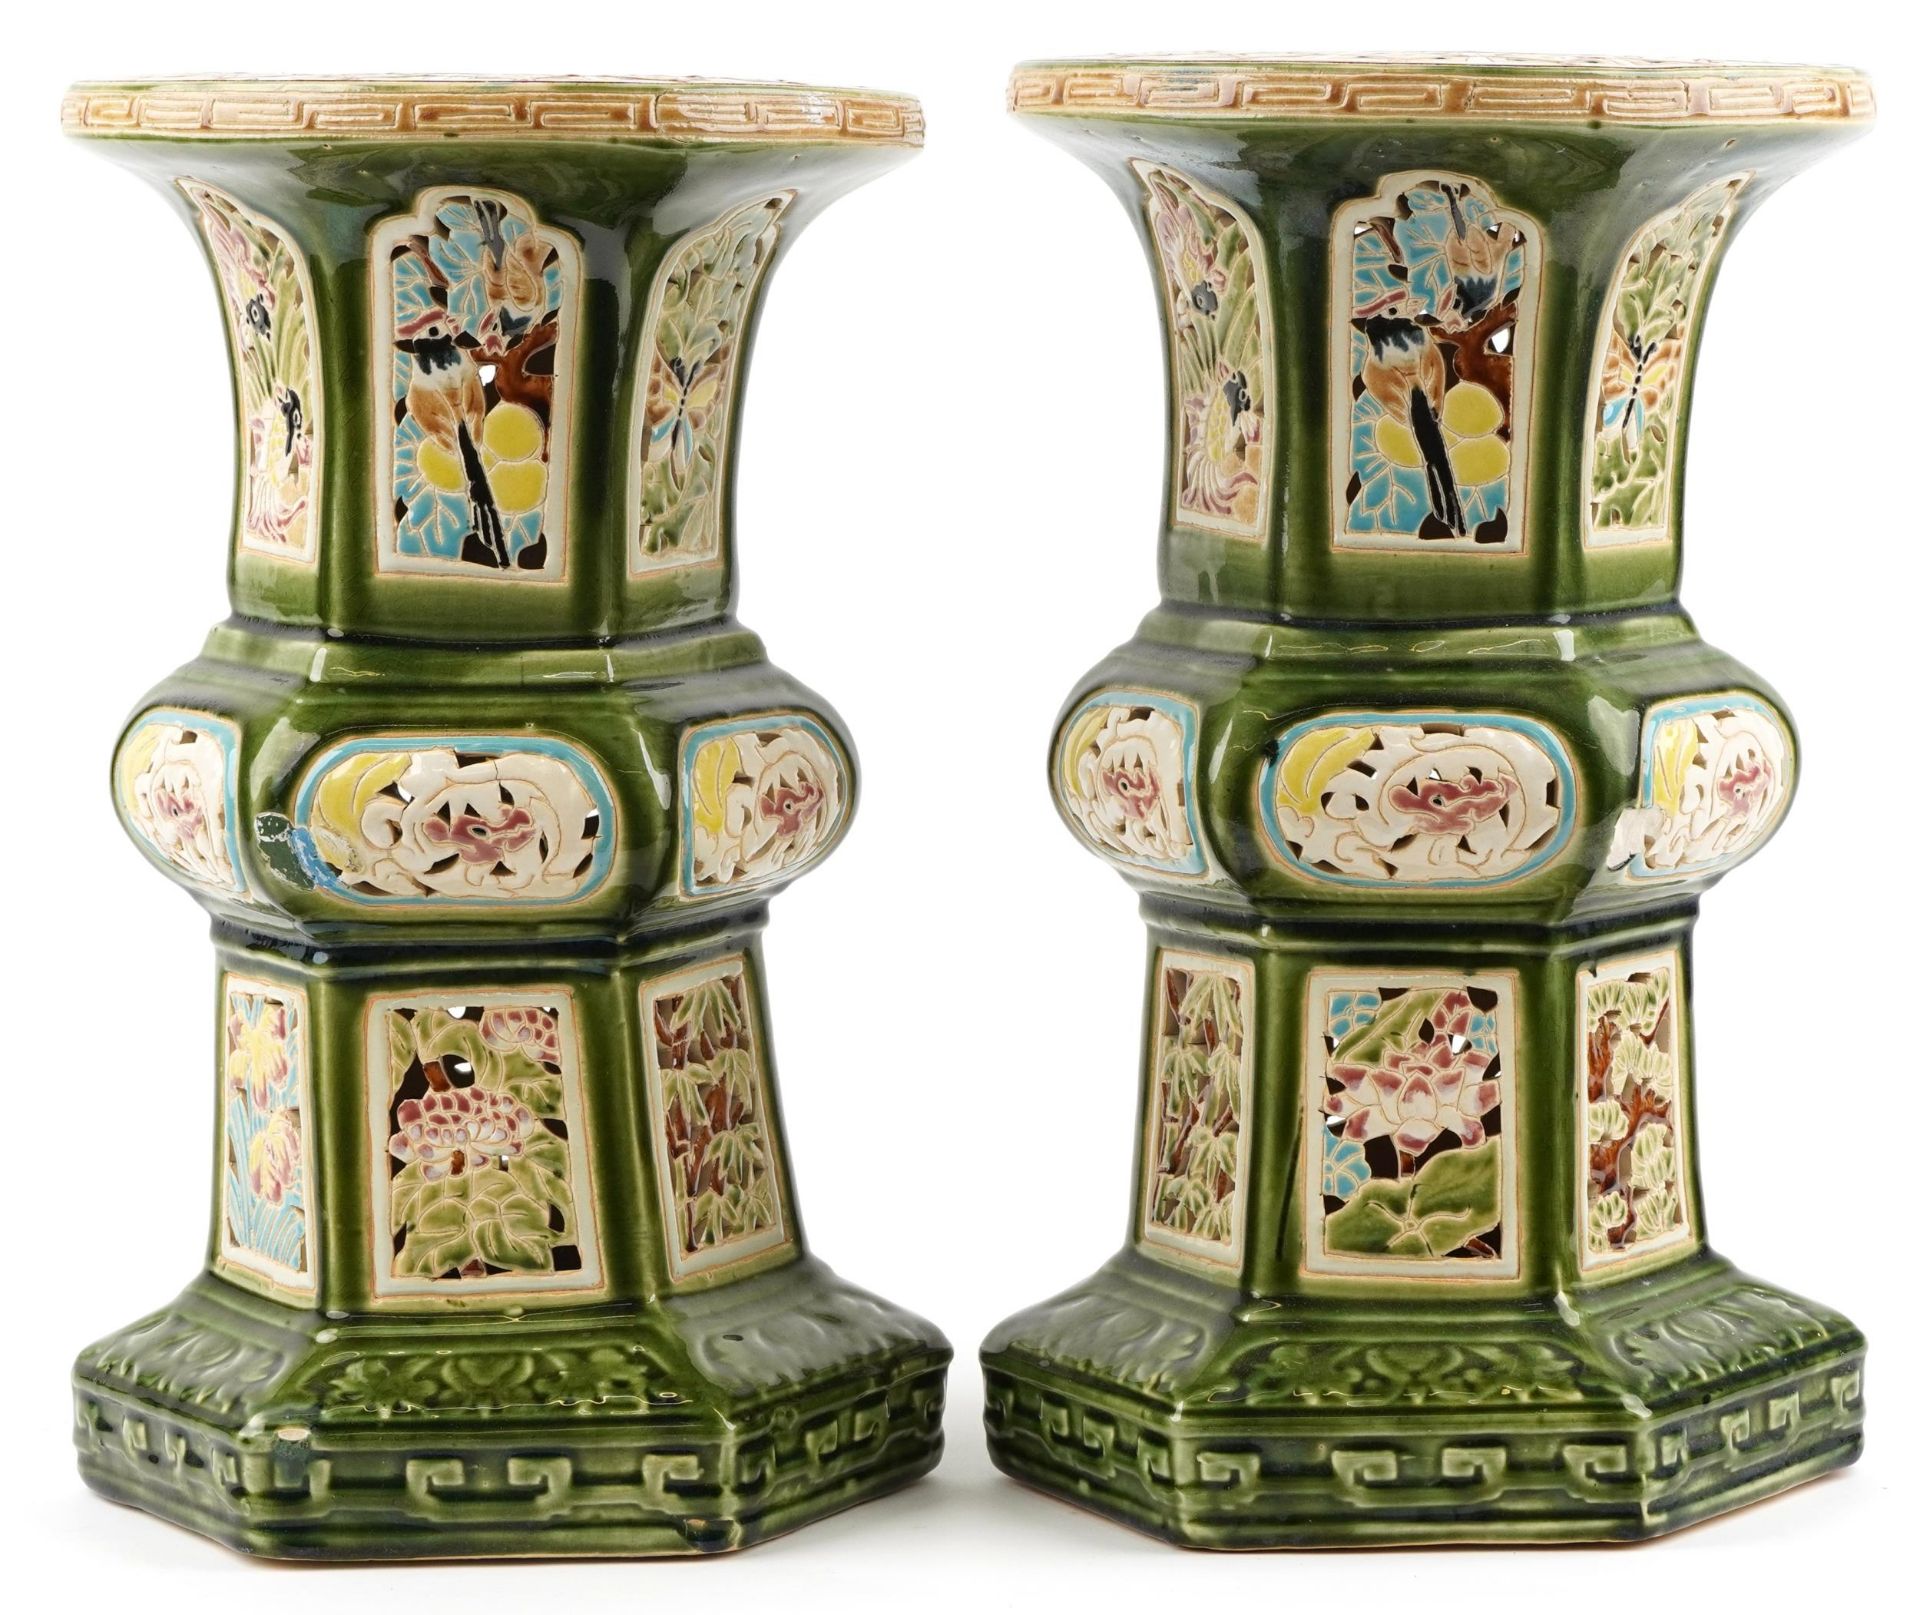 Pair of Chinese pierced porcelain archaic style garden seats each hand painted with flowers having - Image 3 of 7